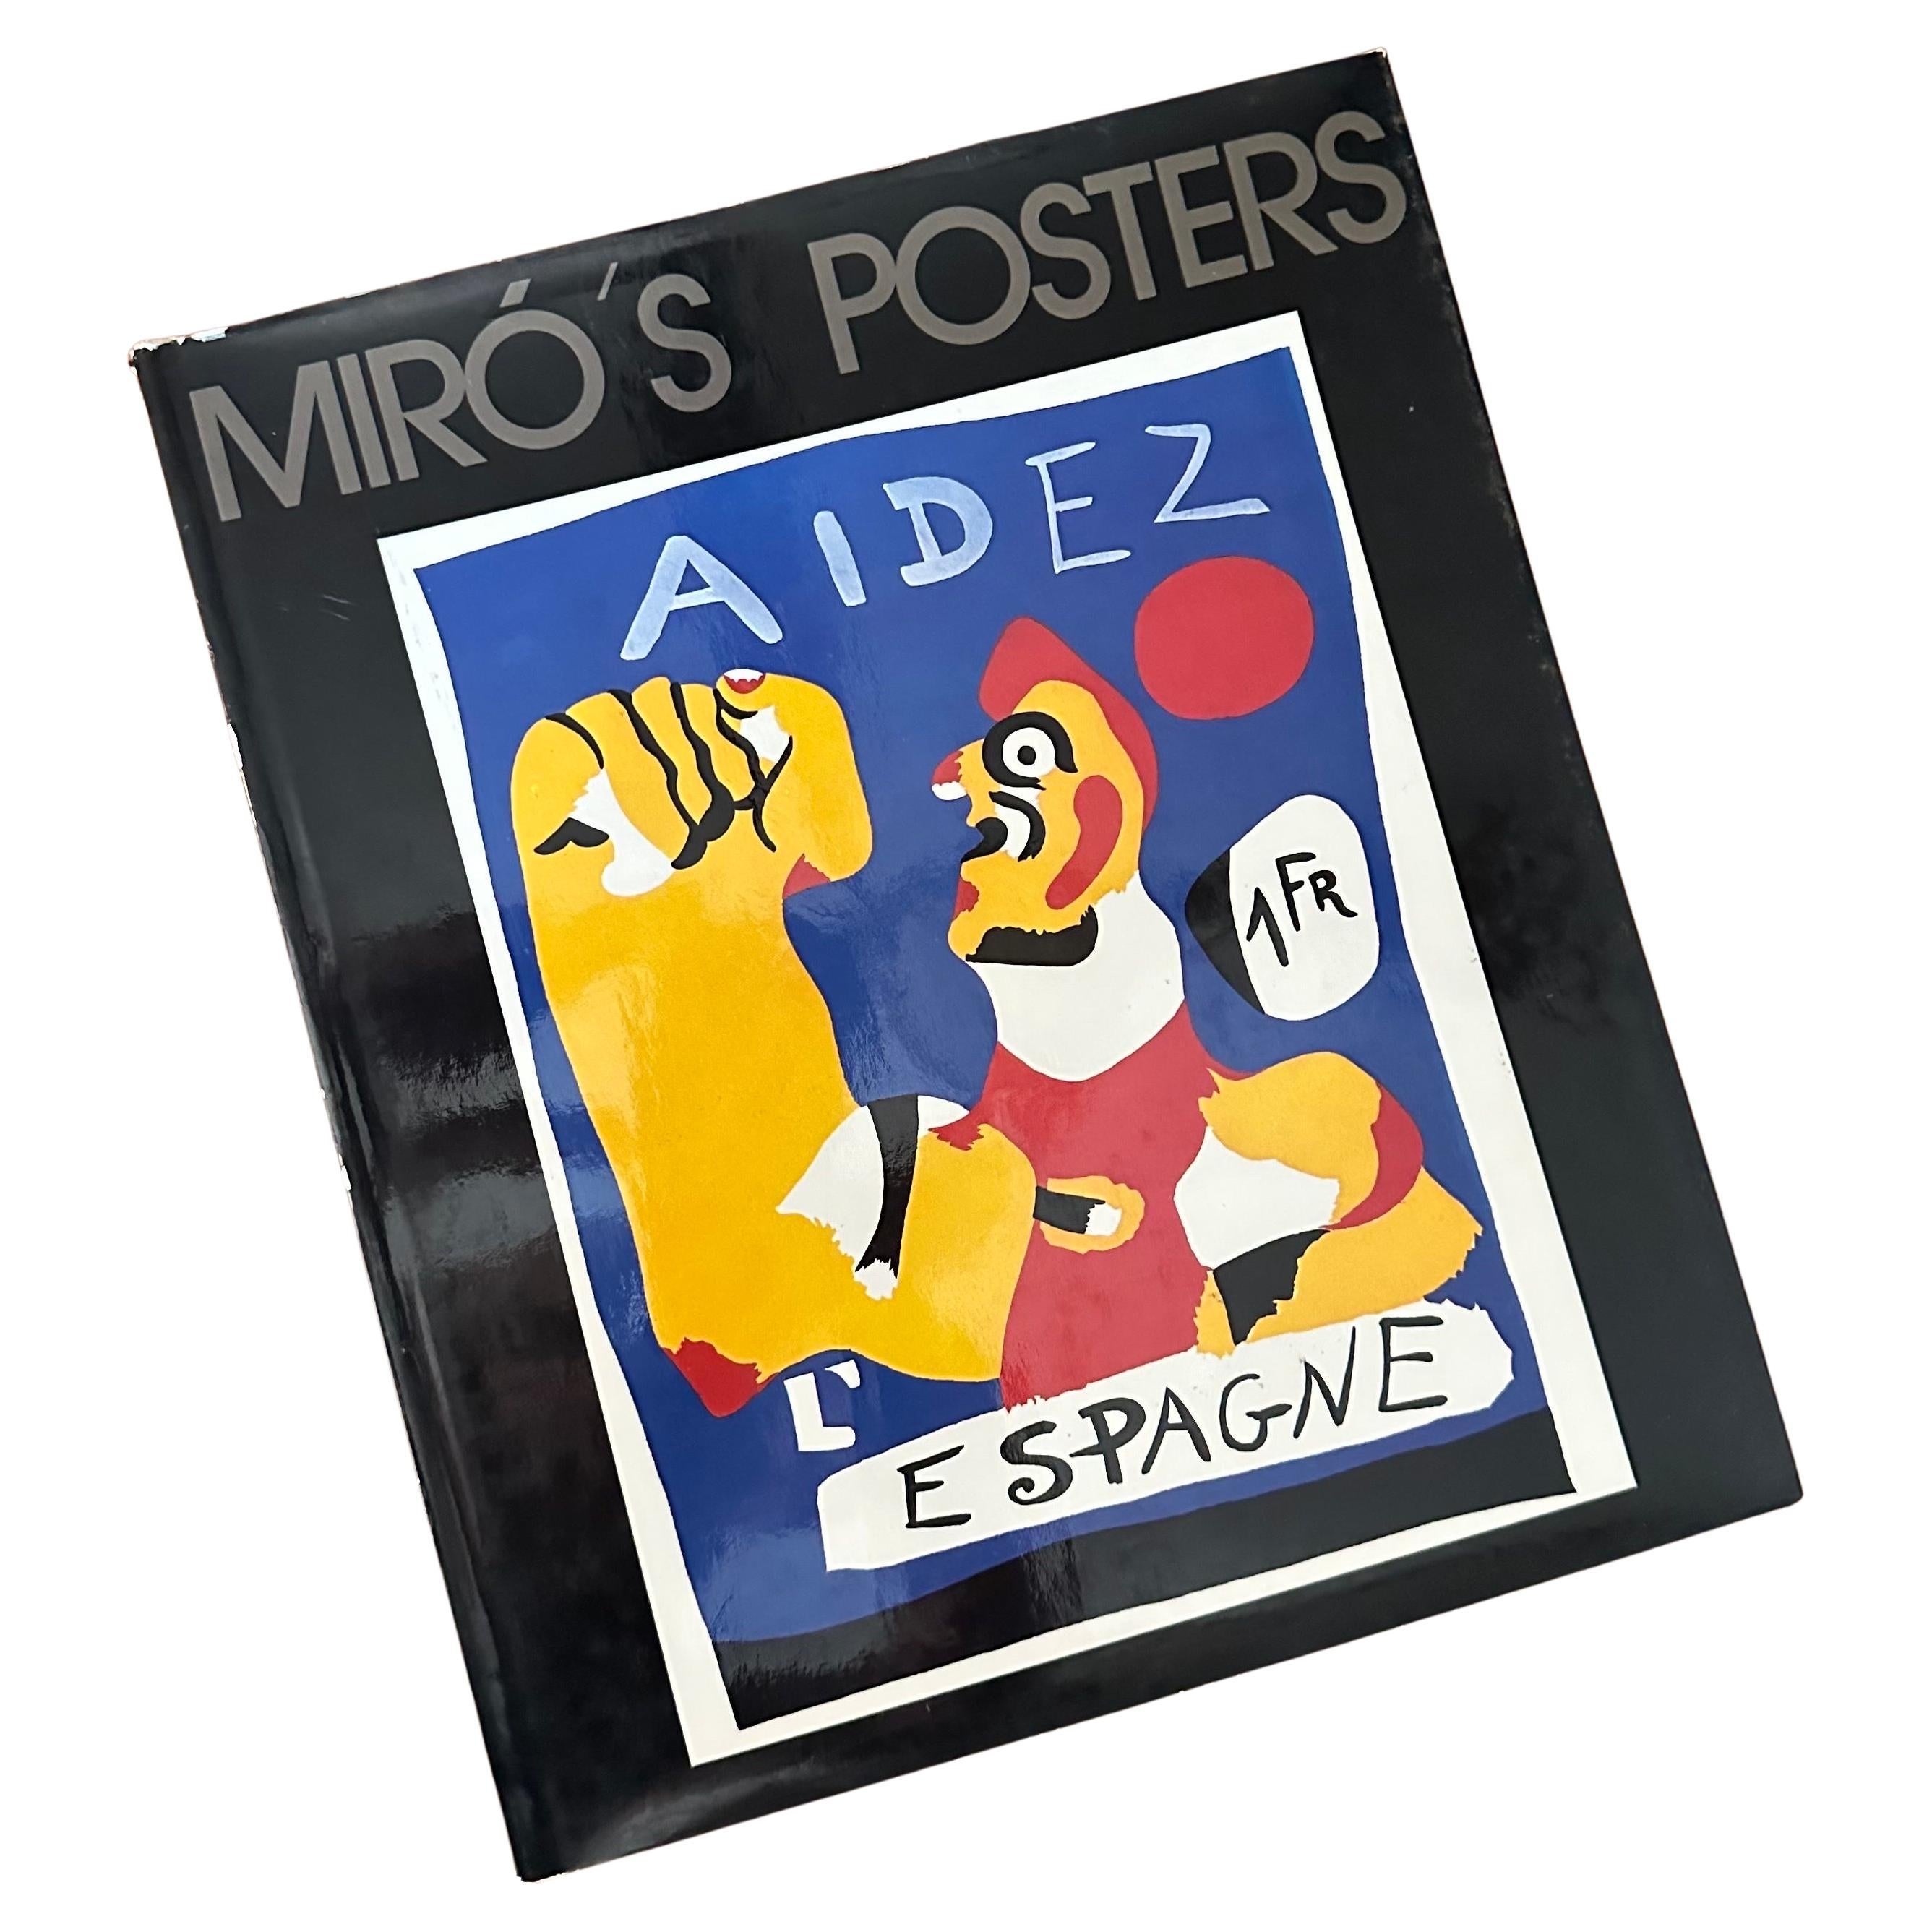 Vintage "Miro's Posters" Art Book Catalogued by Gloria Picazo